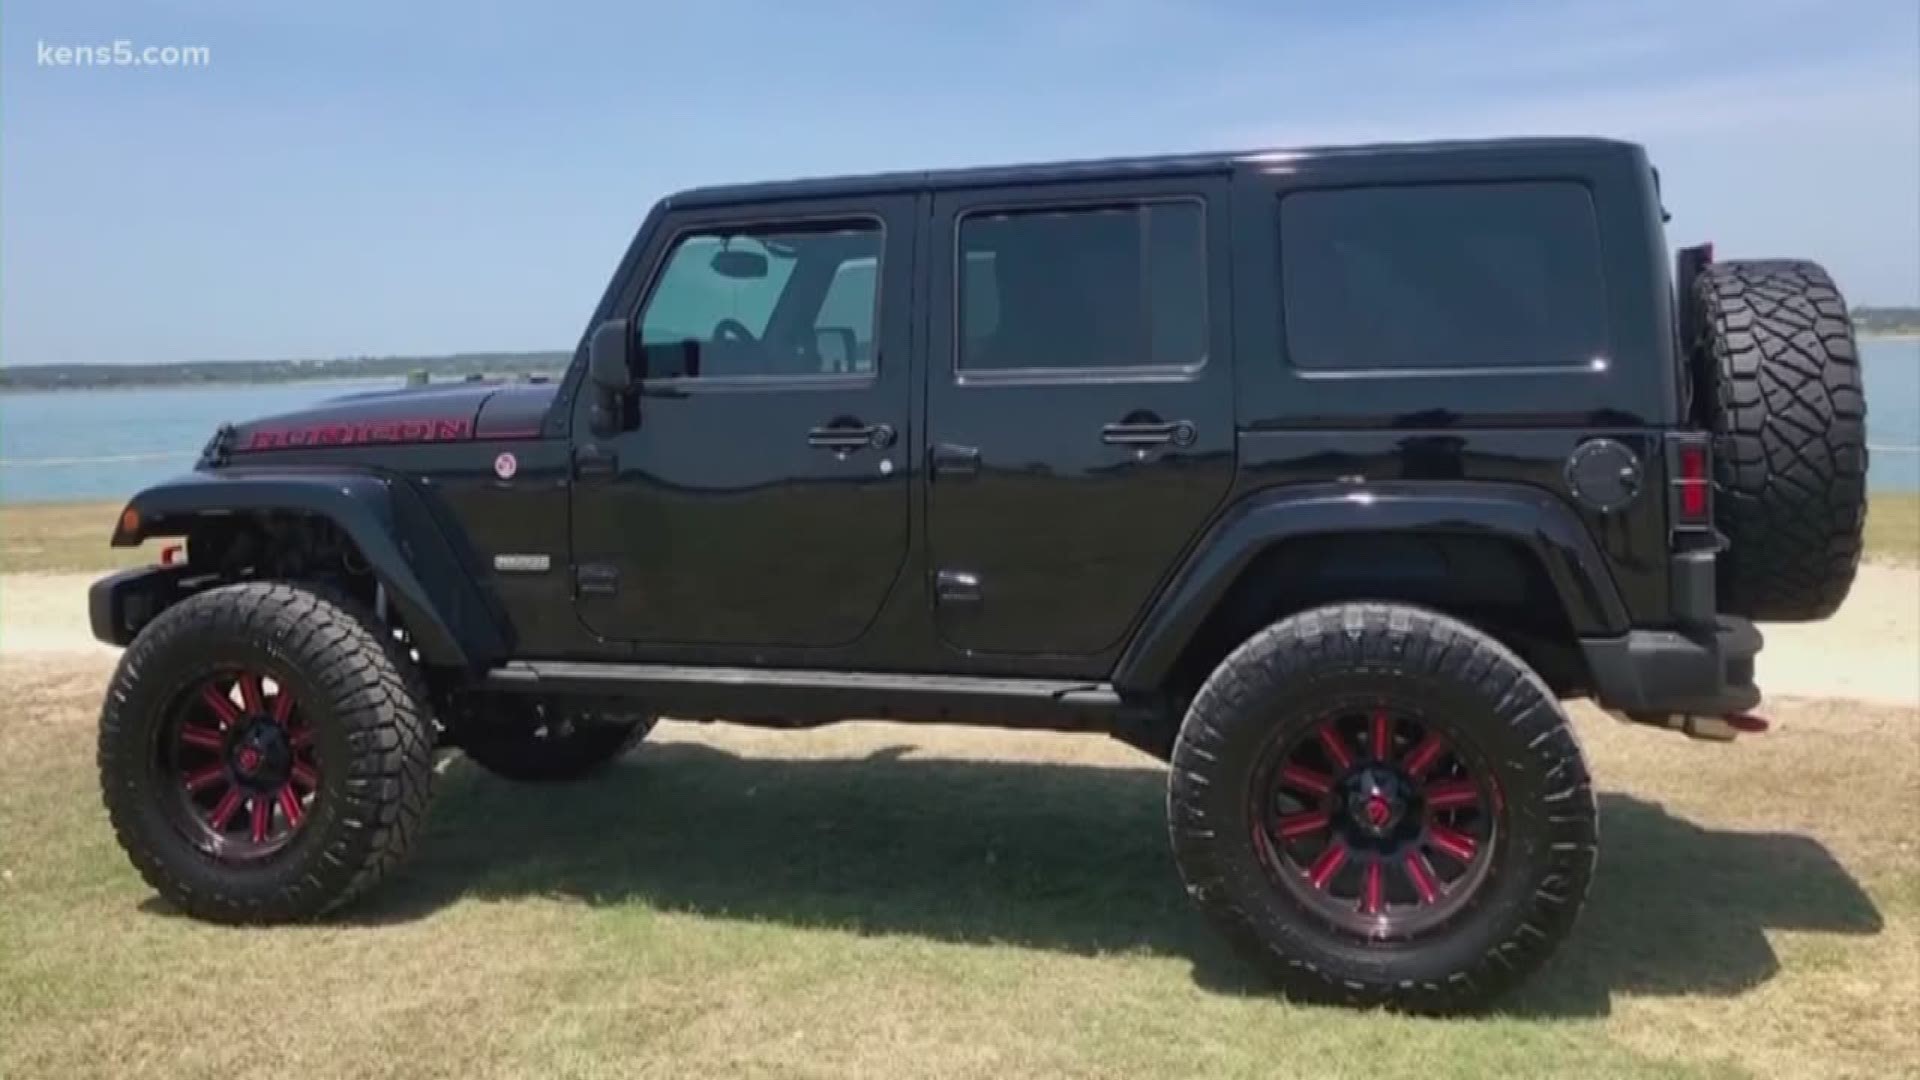 A day after KENS 5 aired a report about a stolen Jeep, a viewer spotted the vehicle and police were able to recover it and return it to the family it was stolen from.